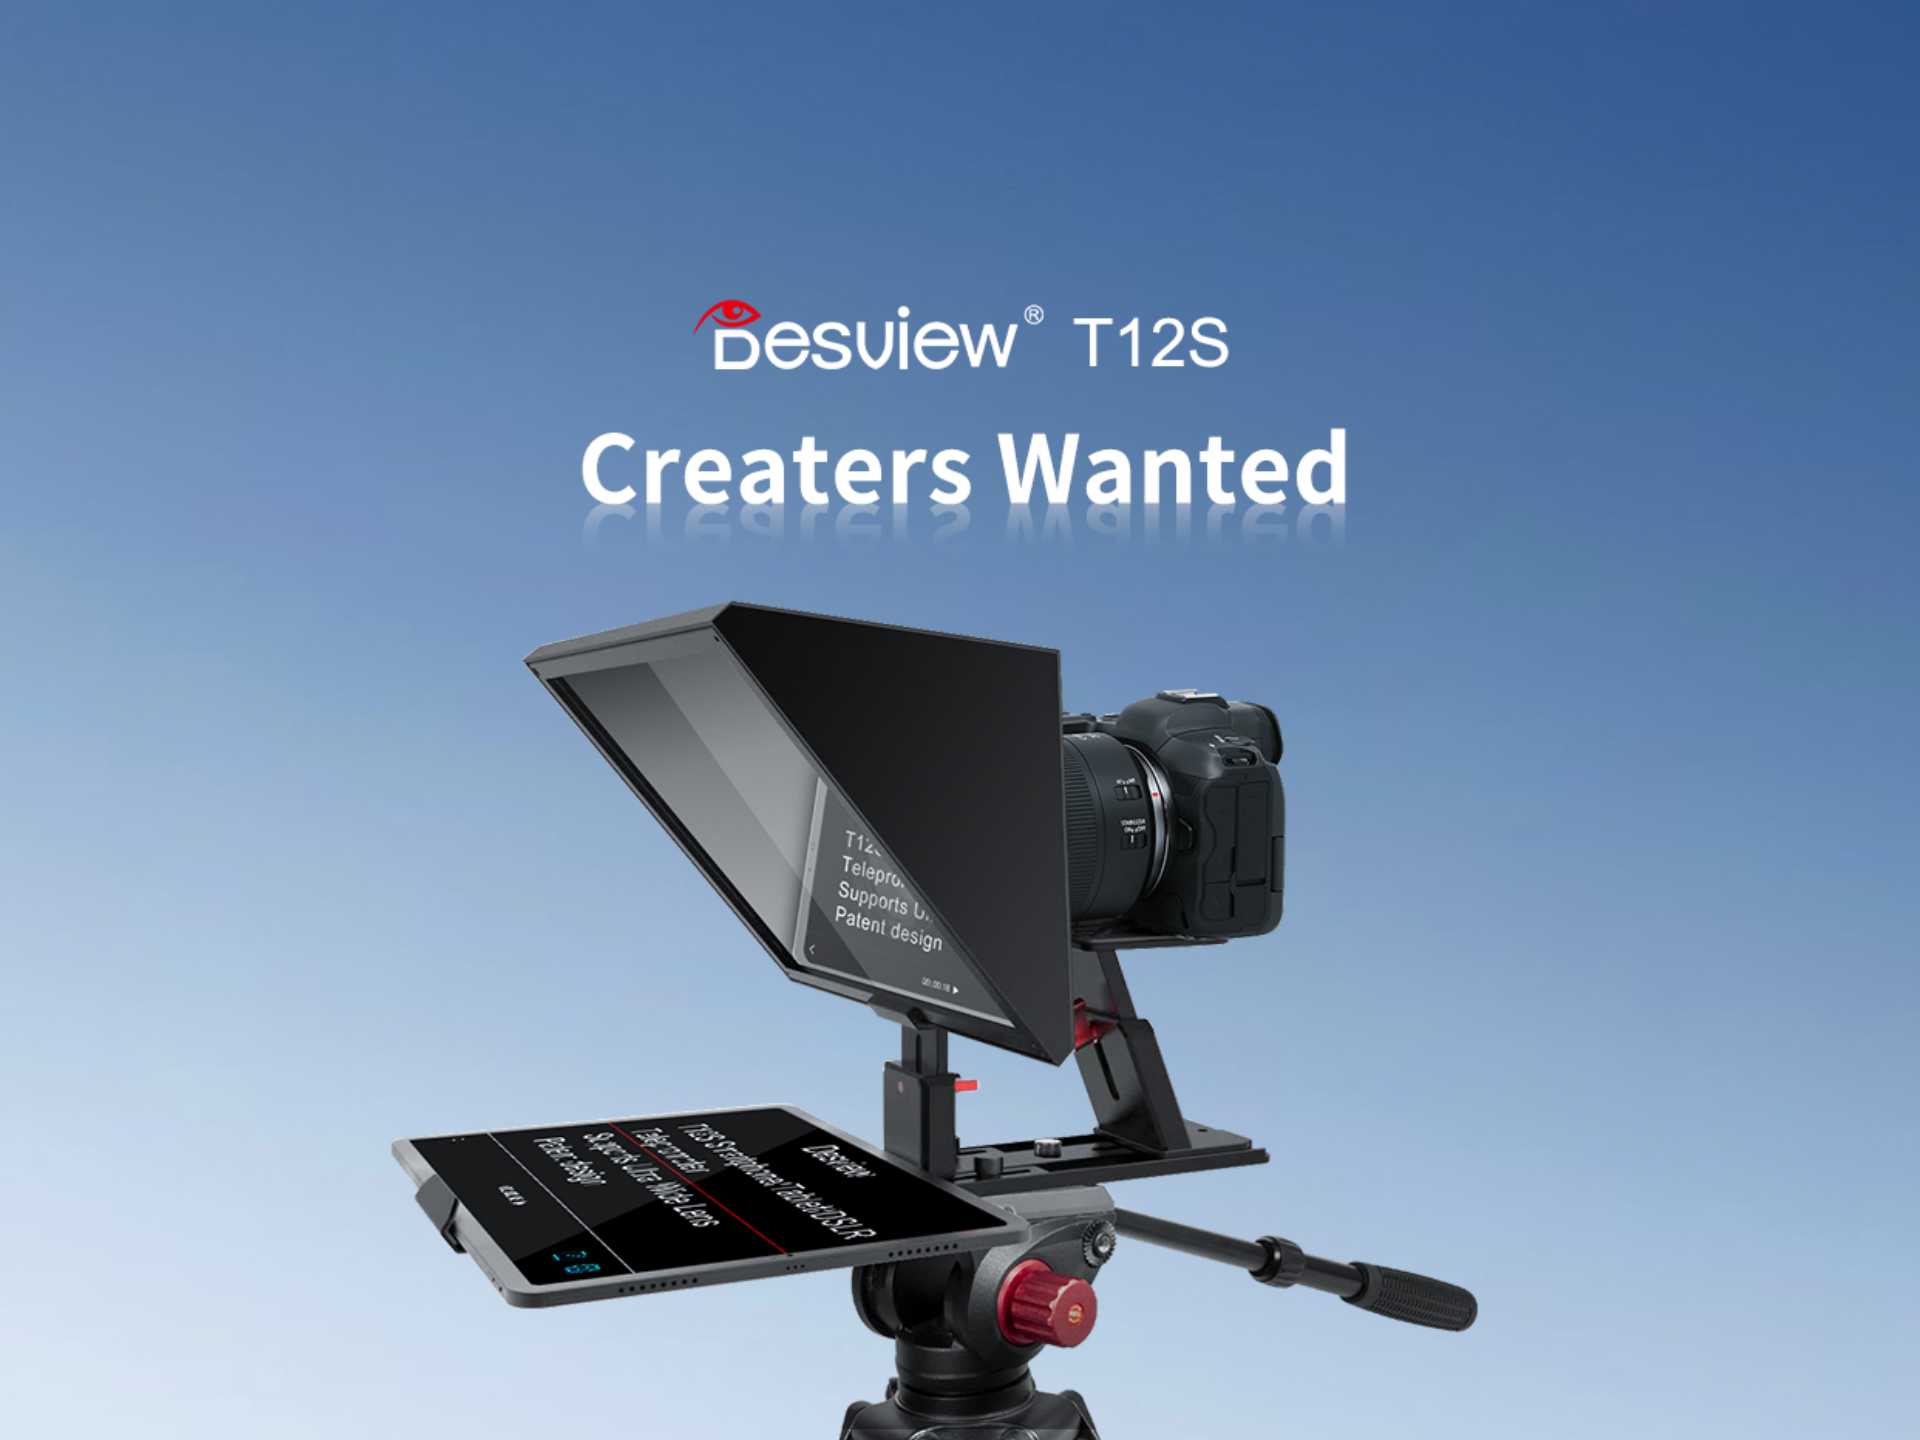 Desview T12S teleprompter